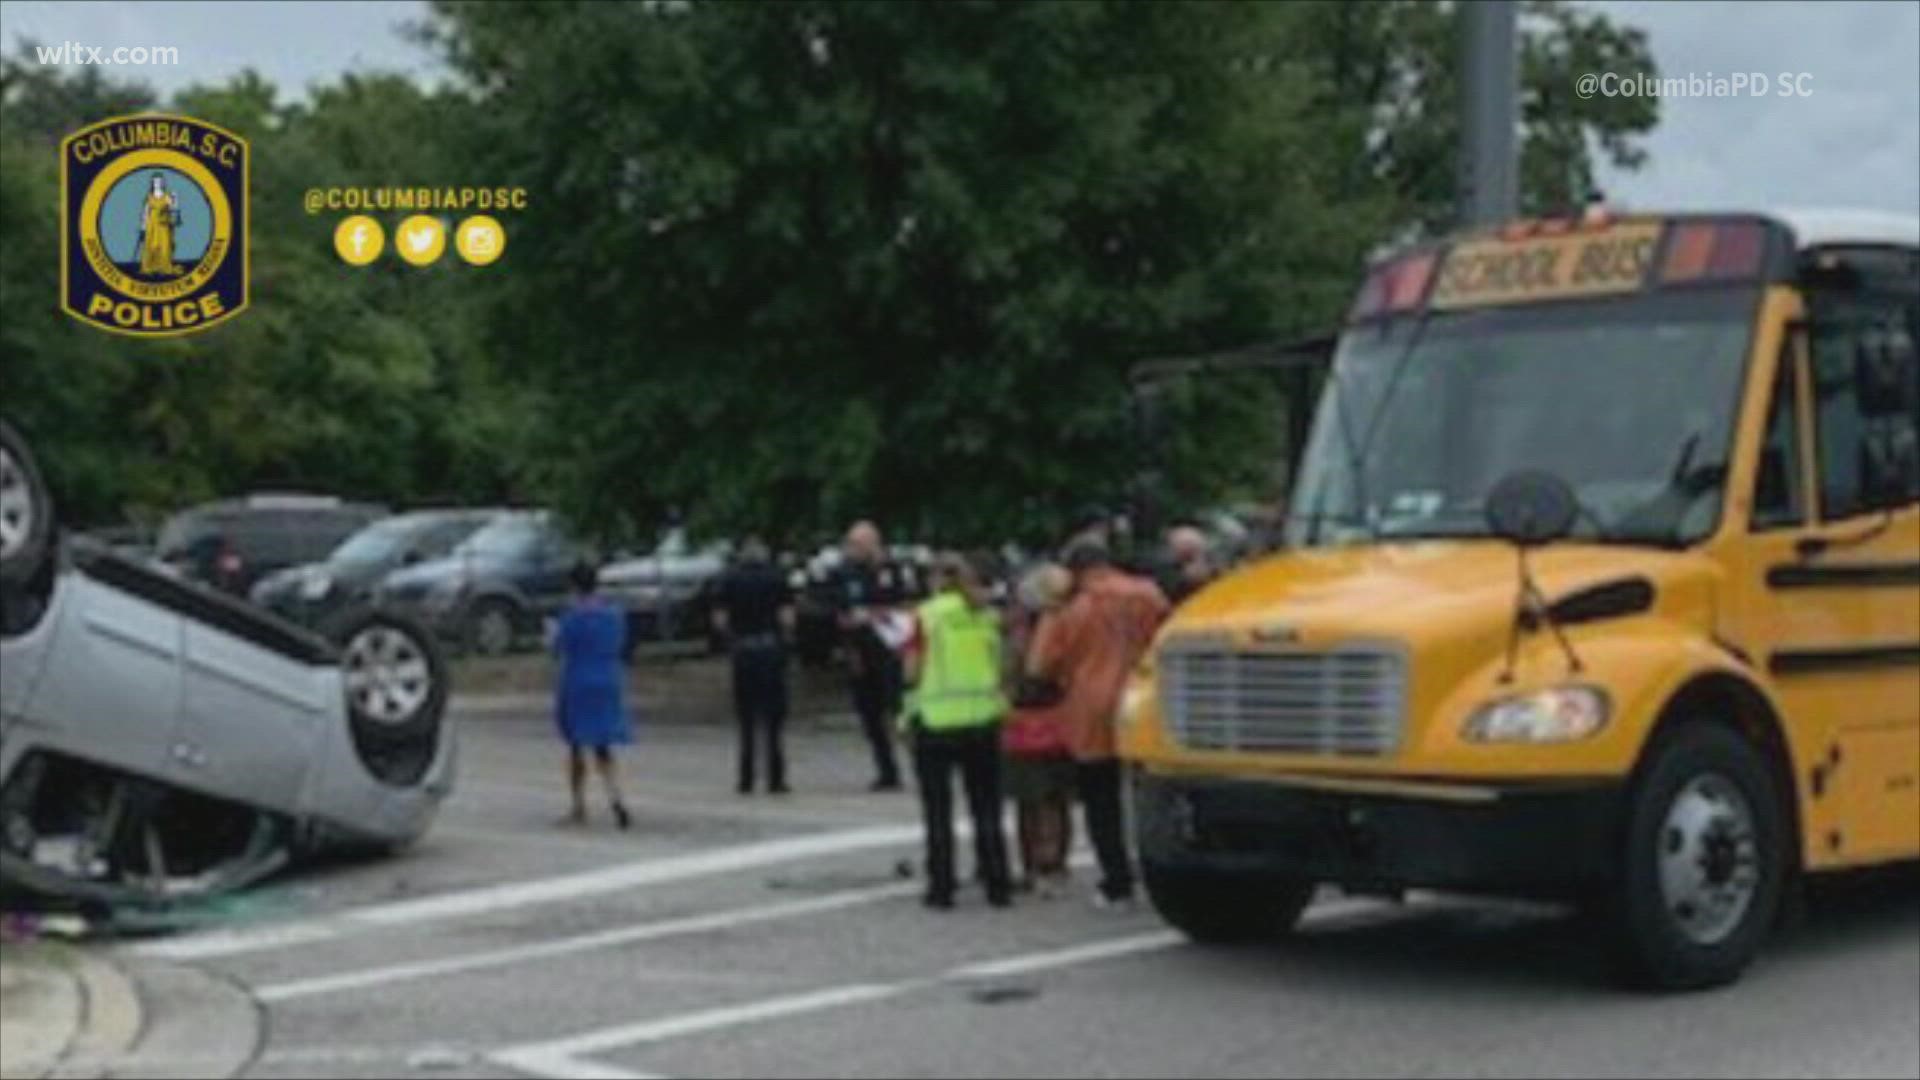 Nine students were on the bus, the accident remains under investigation.